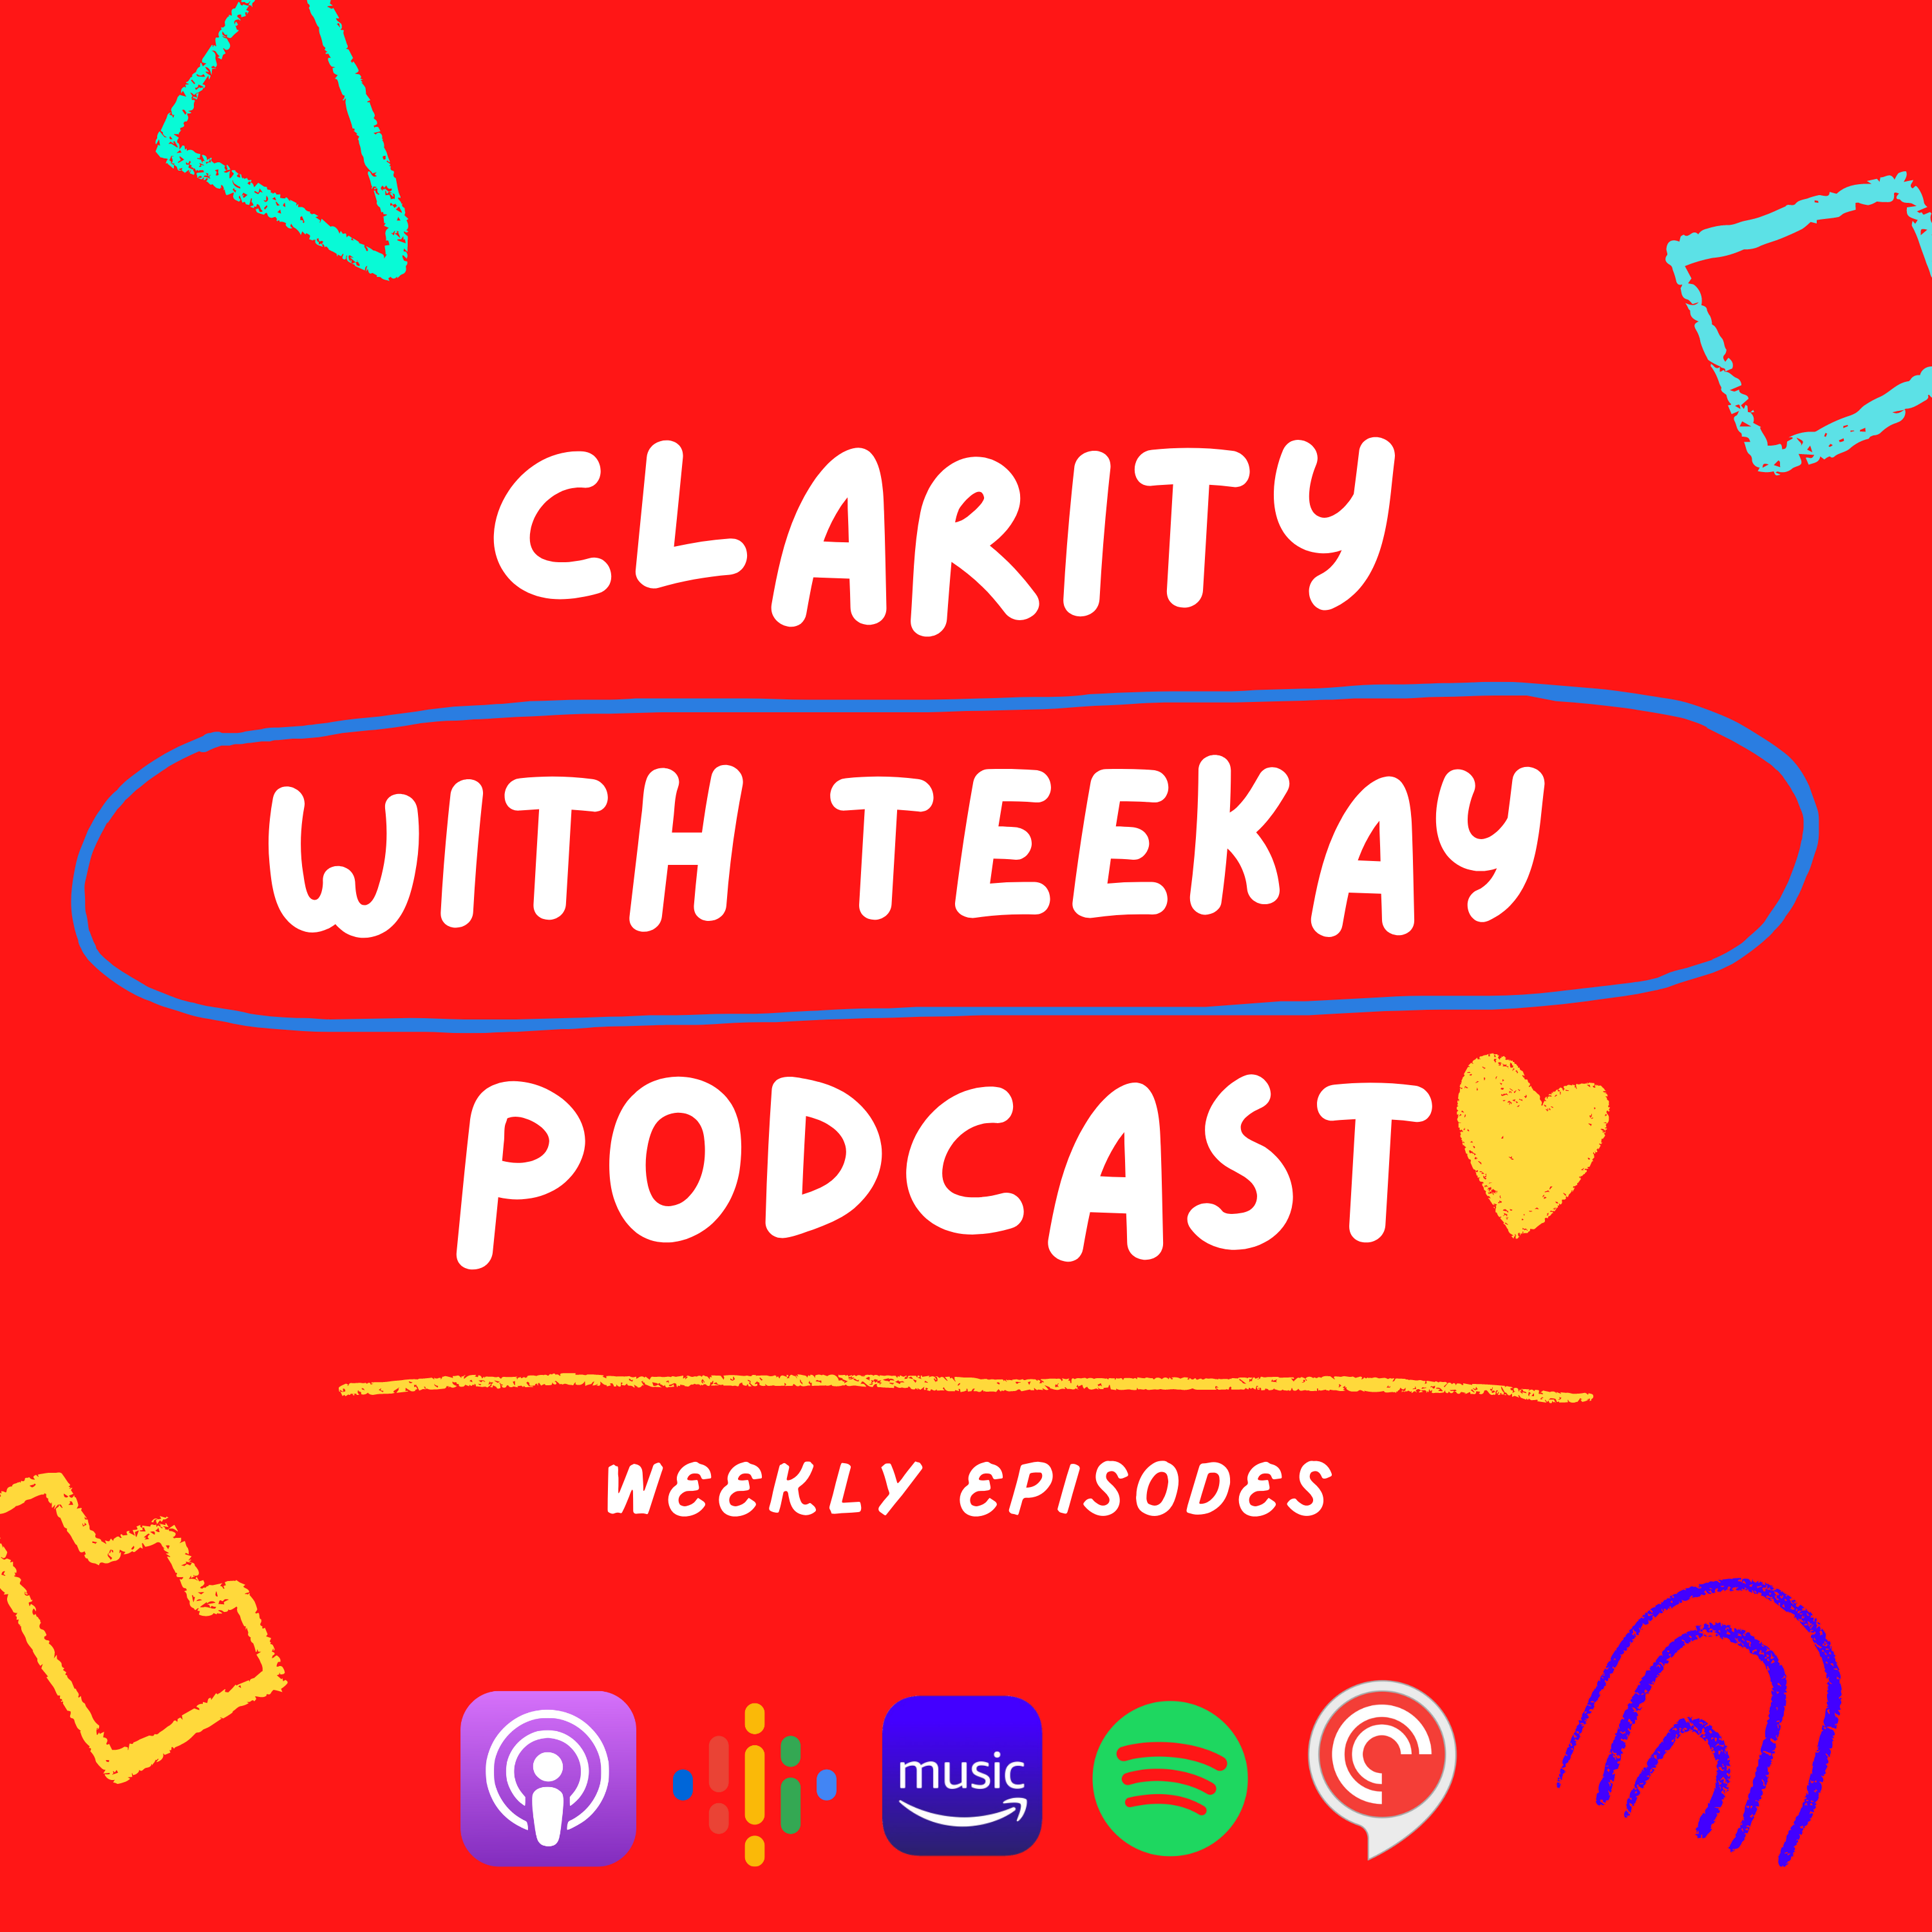 Clarity with teekay podcast cover art